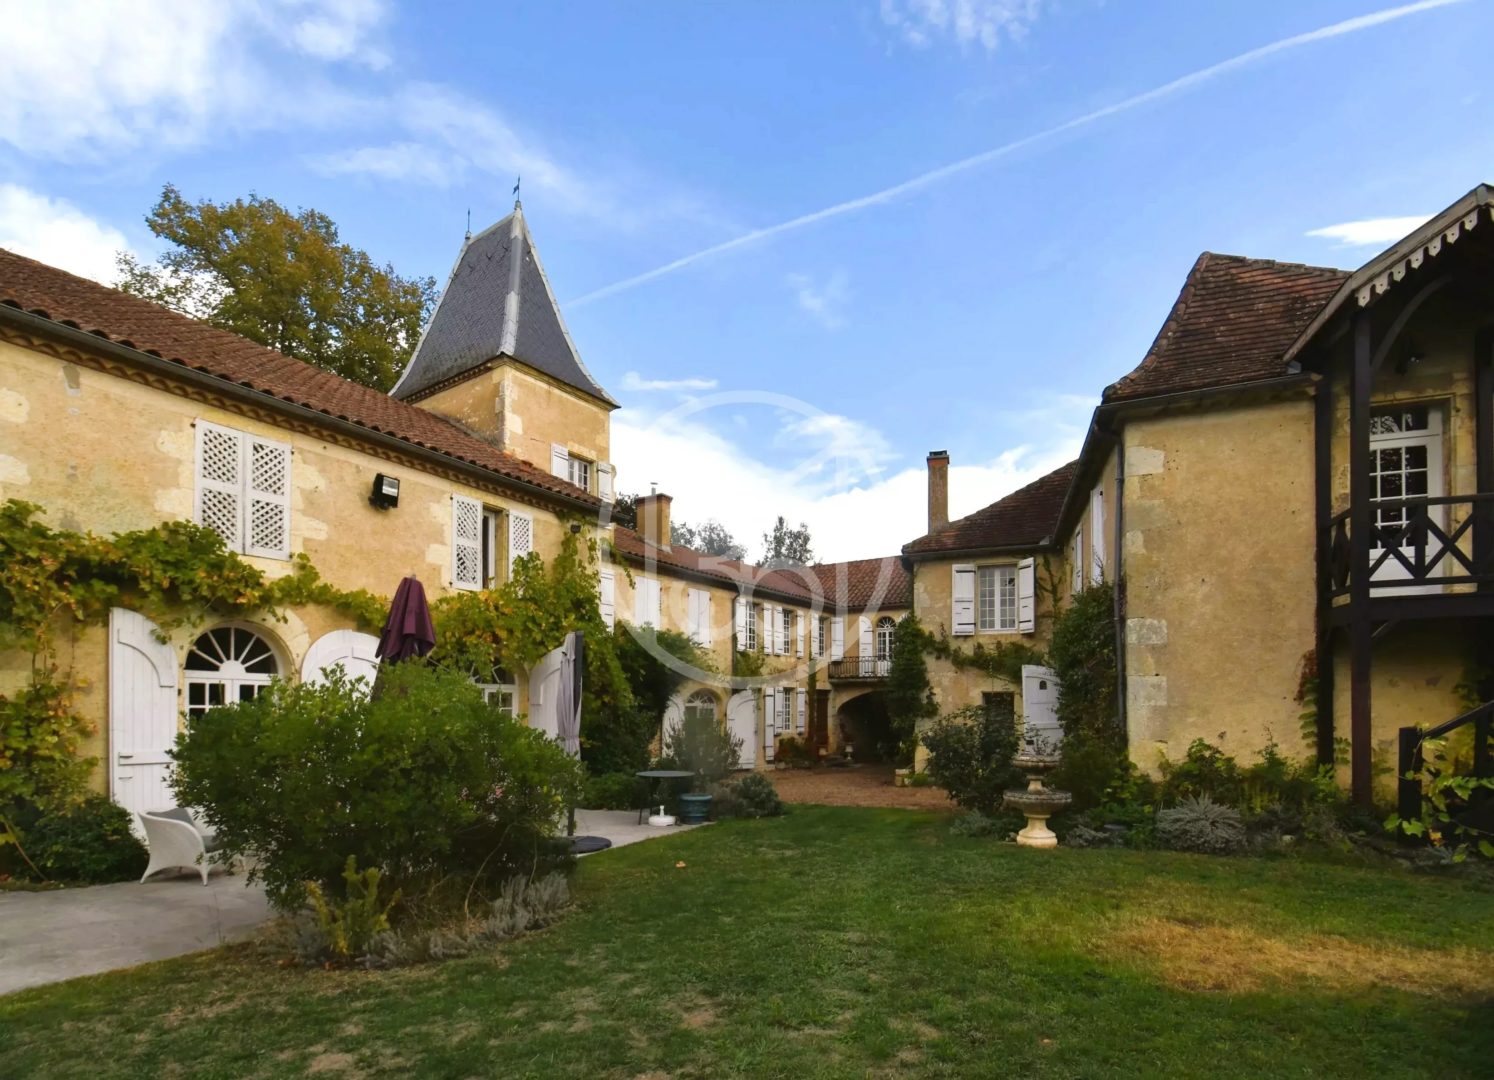 18TH-CENTURY CHATEAU – OUTBUILDINGS – POOL - 8912TS